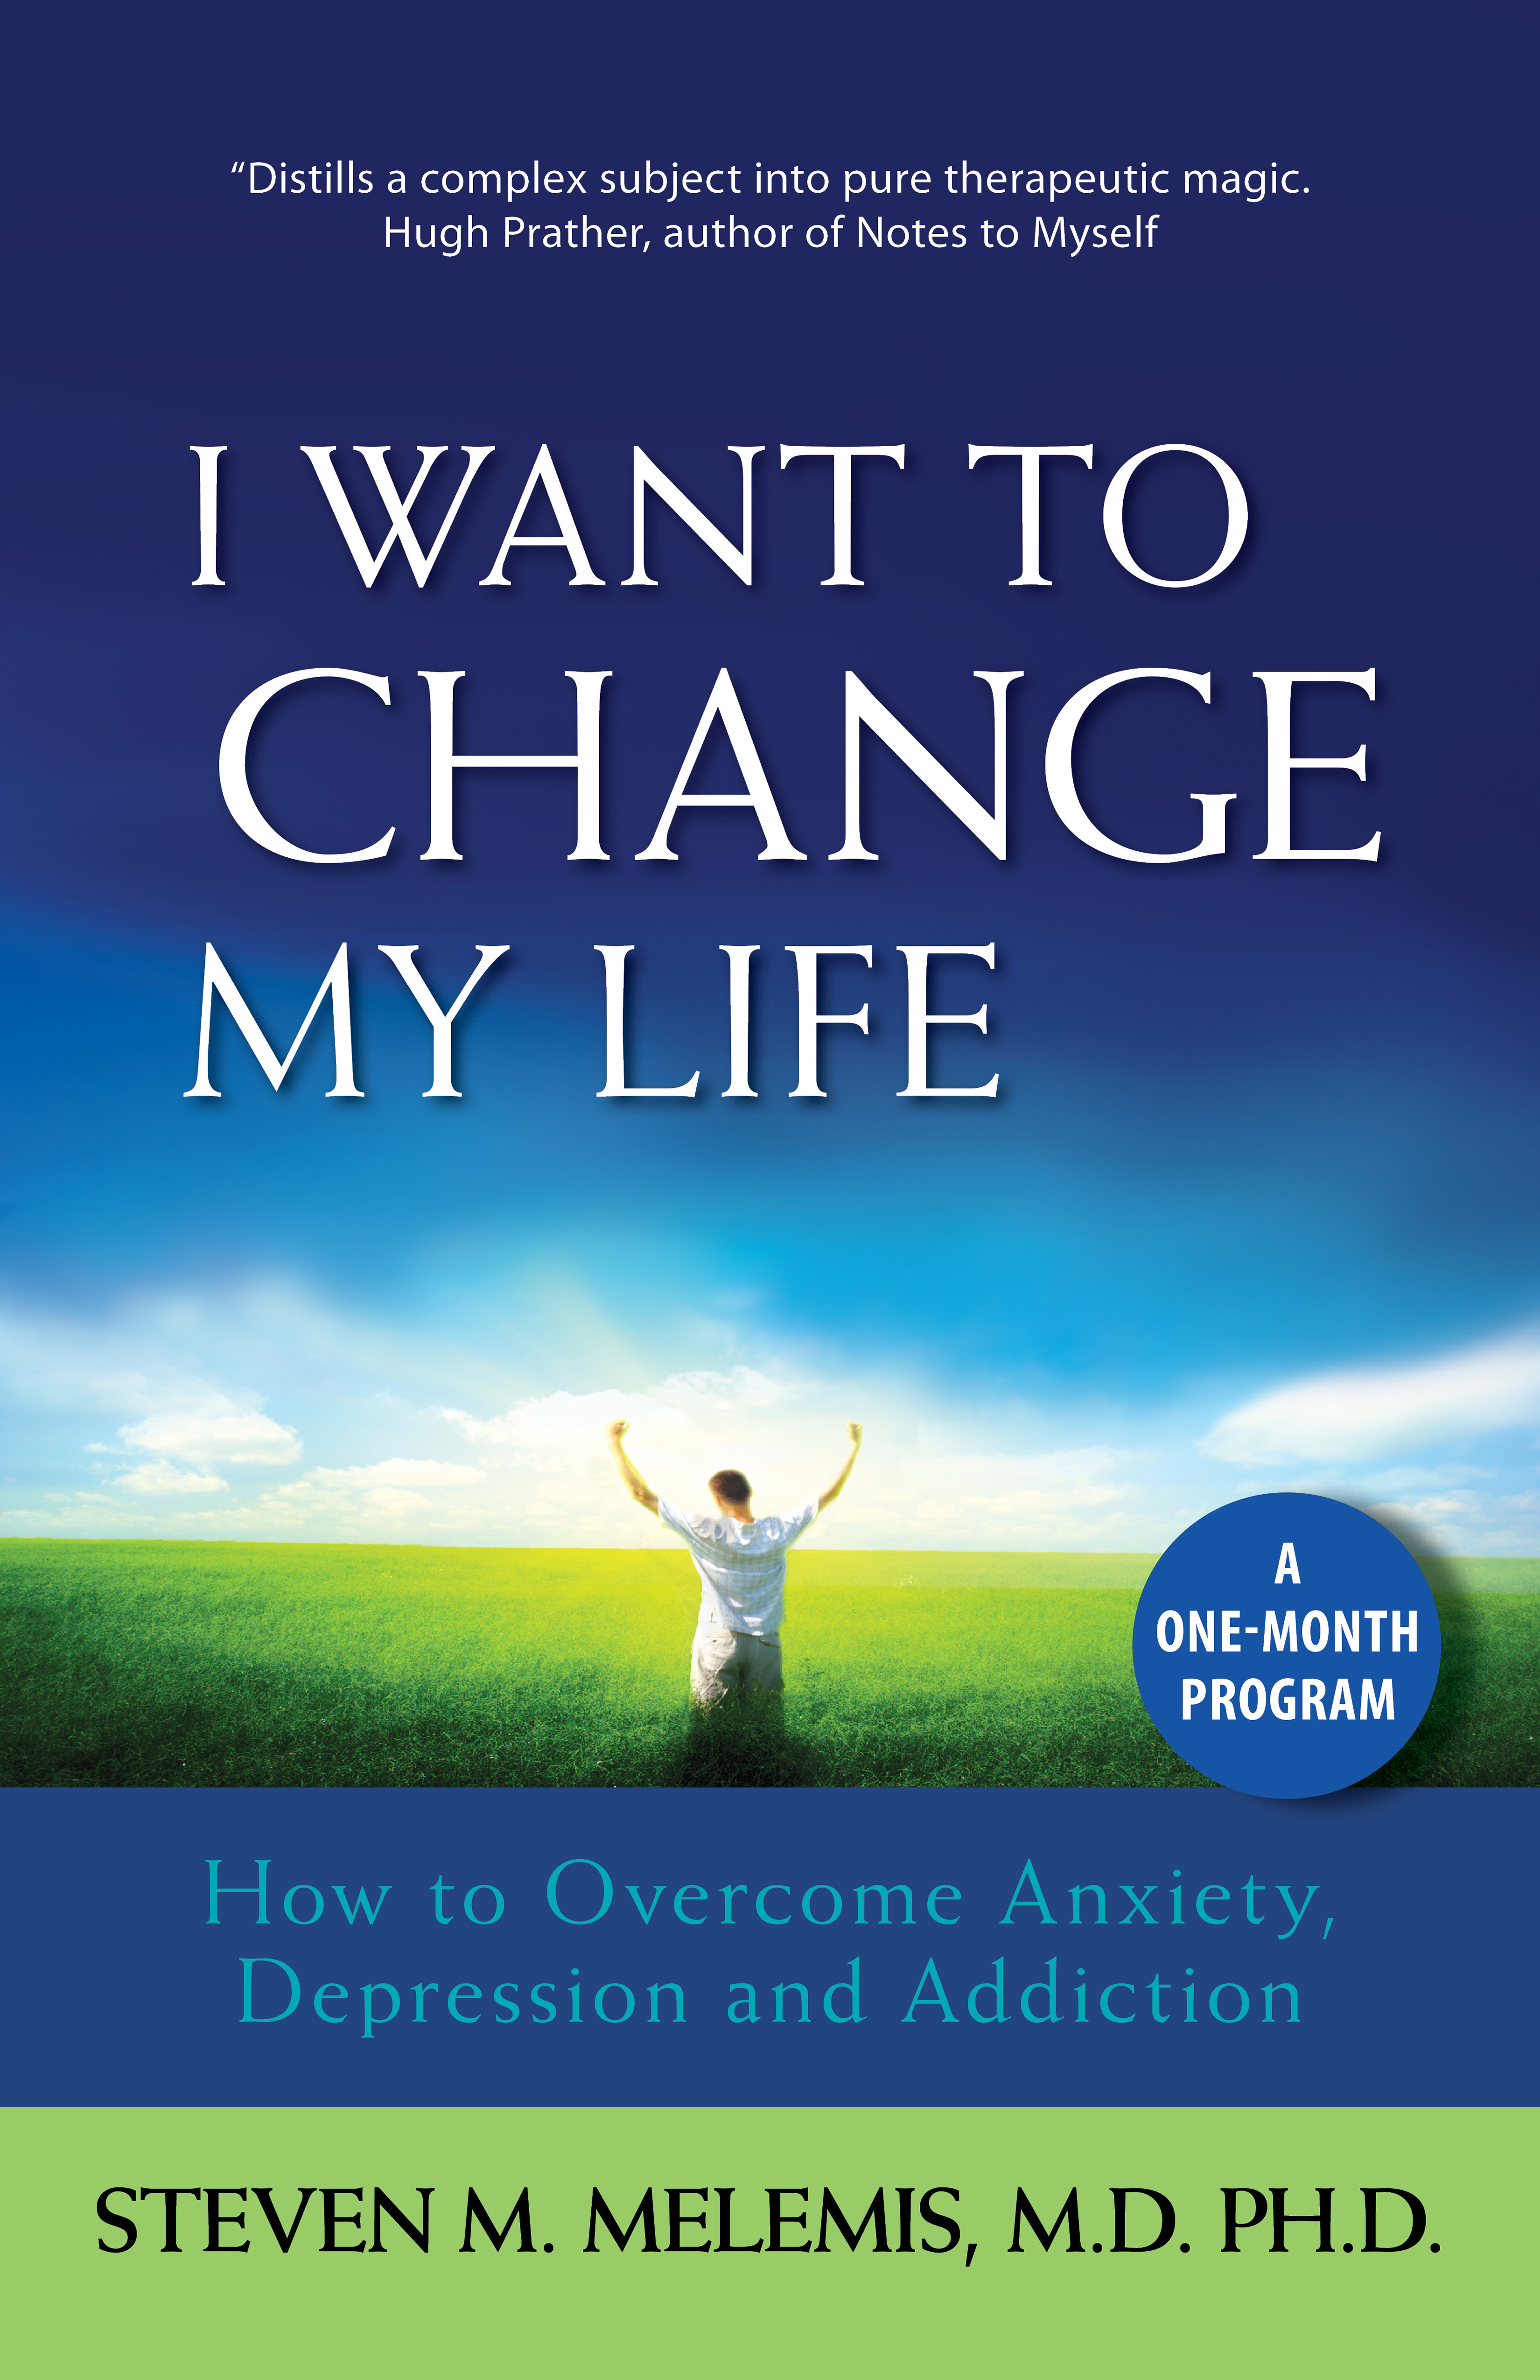 i want to change my life by dr. steven m. melemis